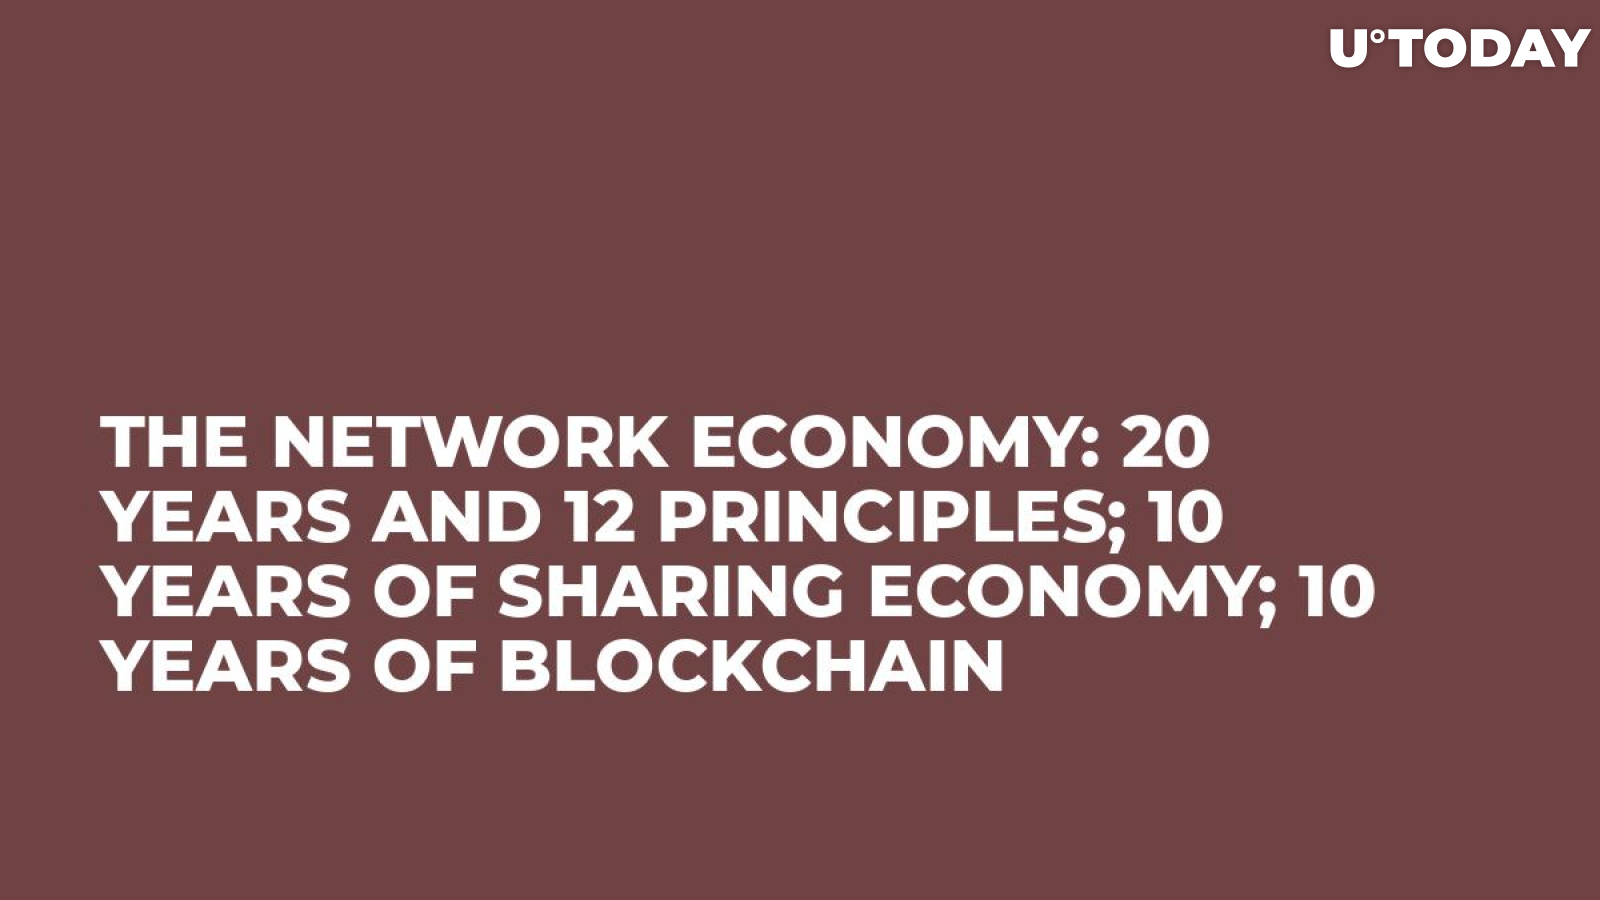 The Network Economy: 20 Years and 12 Principles; 10 Years of Sharing Economy; 10 Years of Blockchain